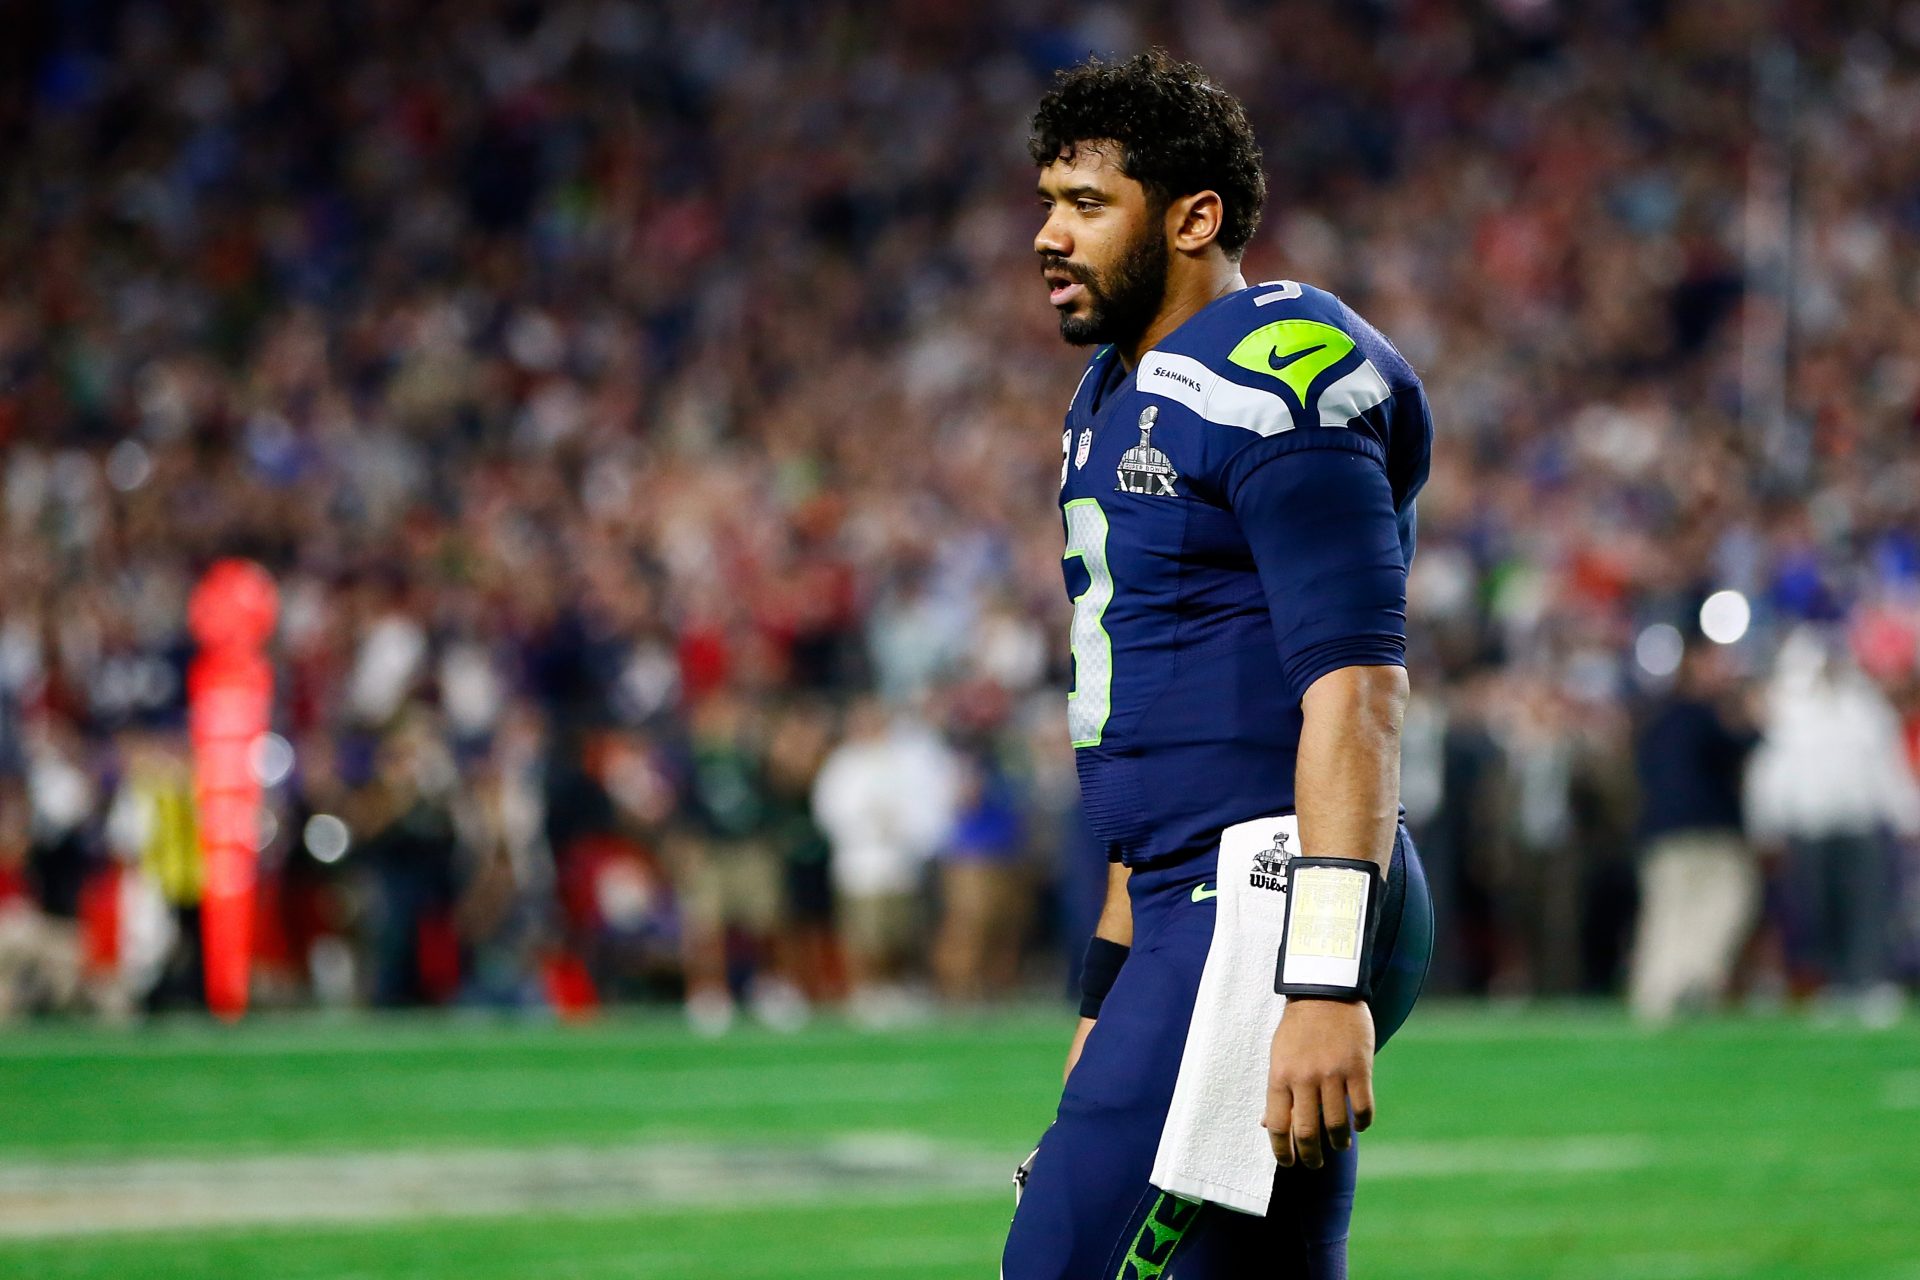 Super Bowl XLIX: Russell Wilson Intercepted At The Goal Line